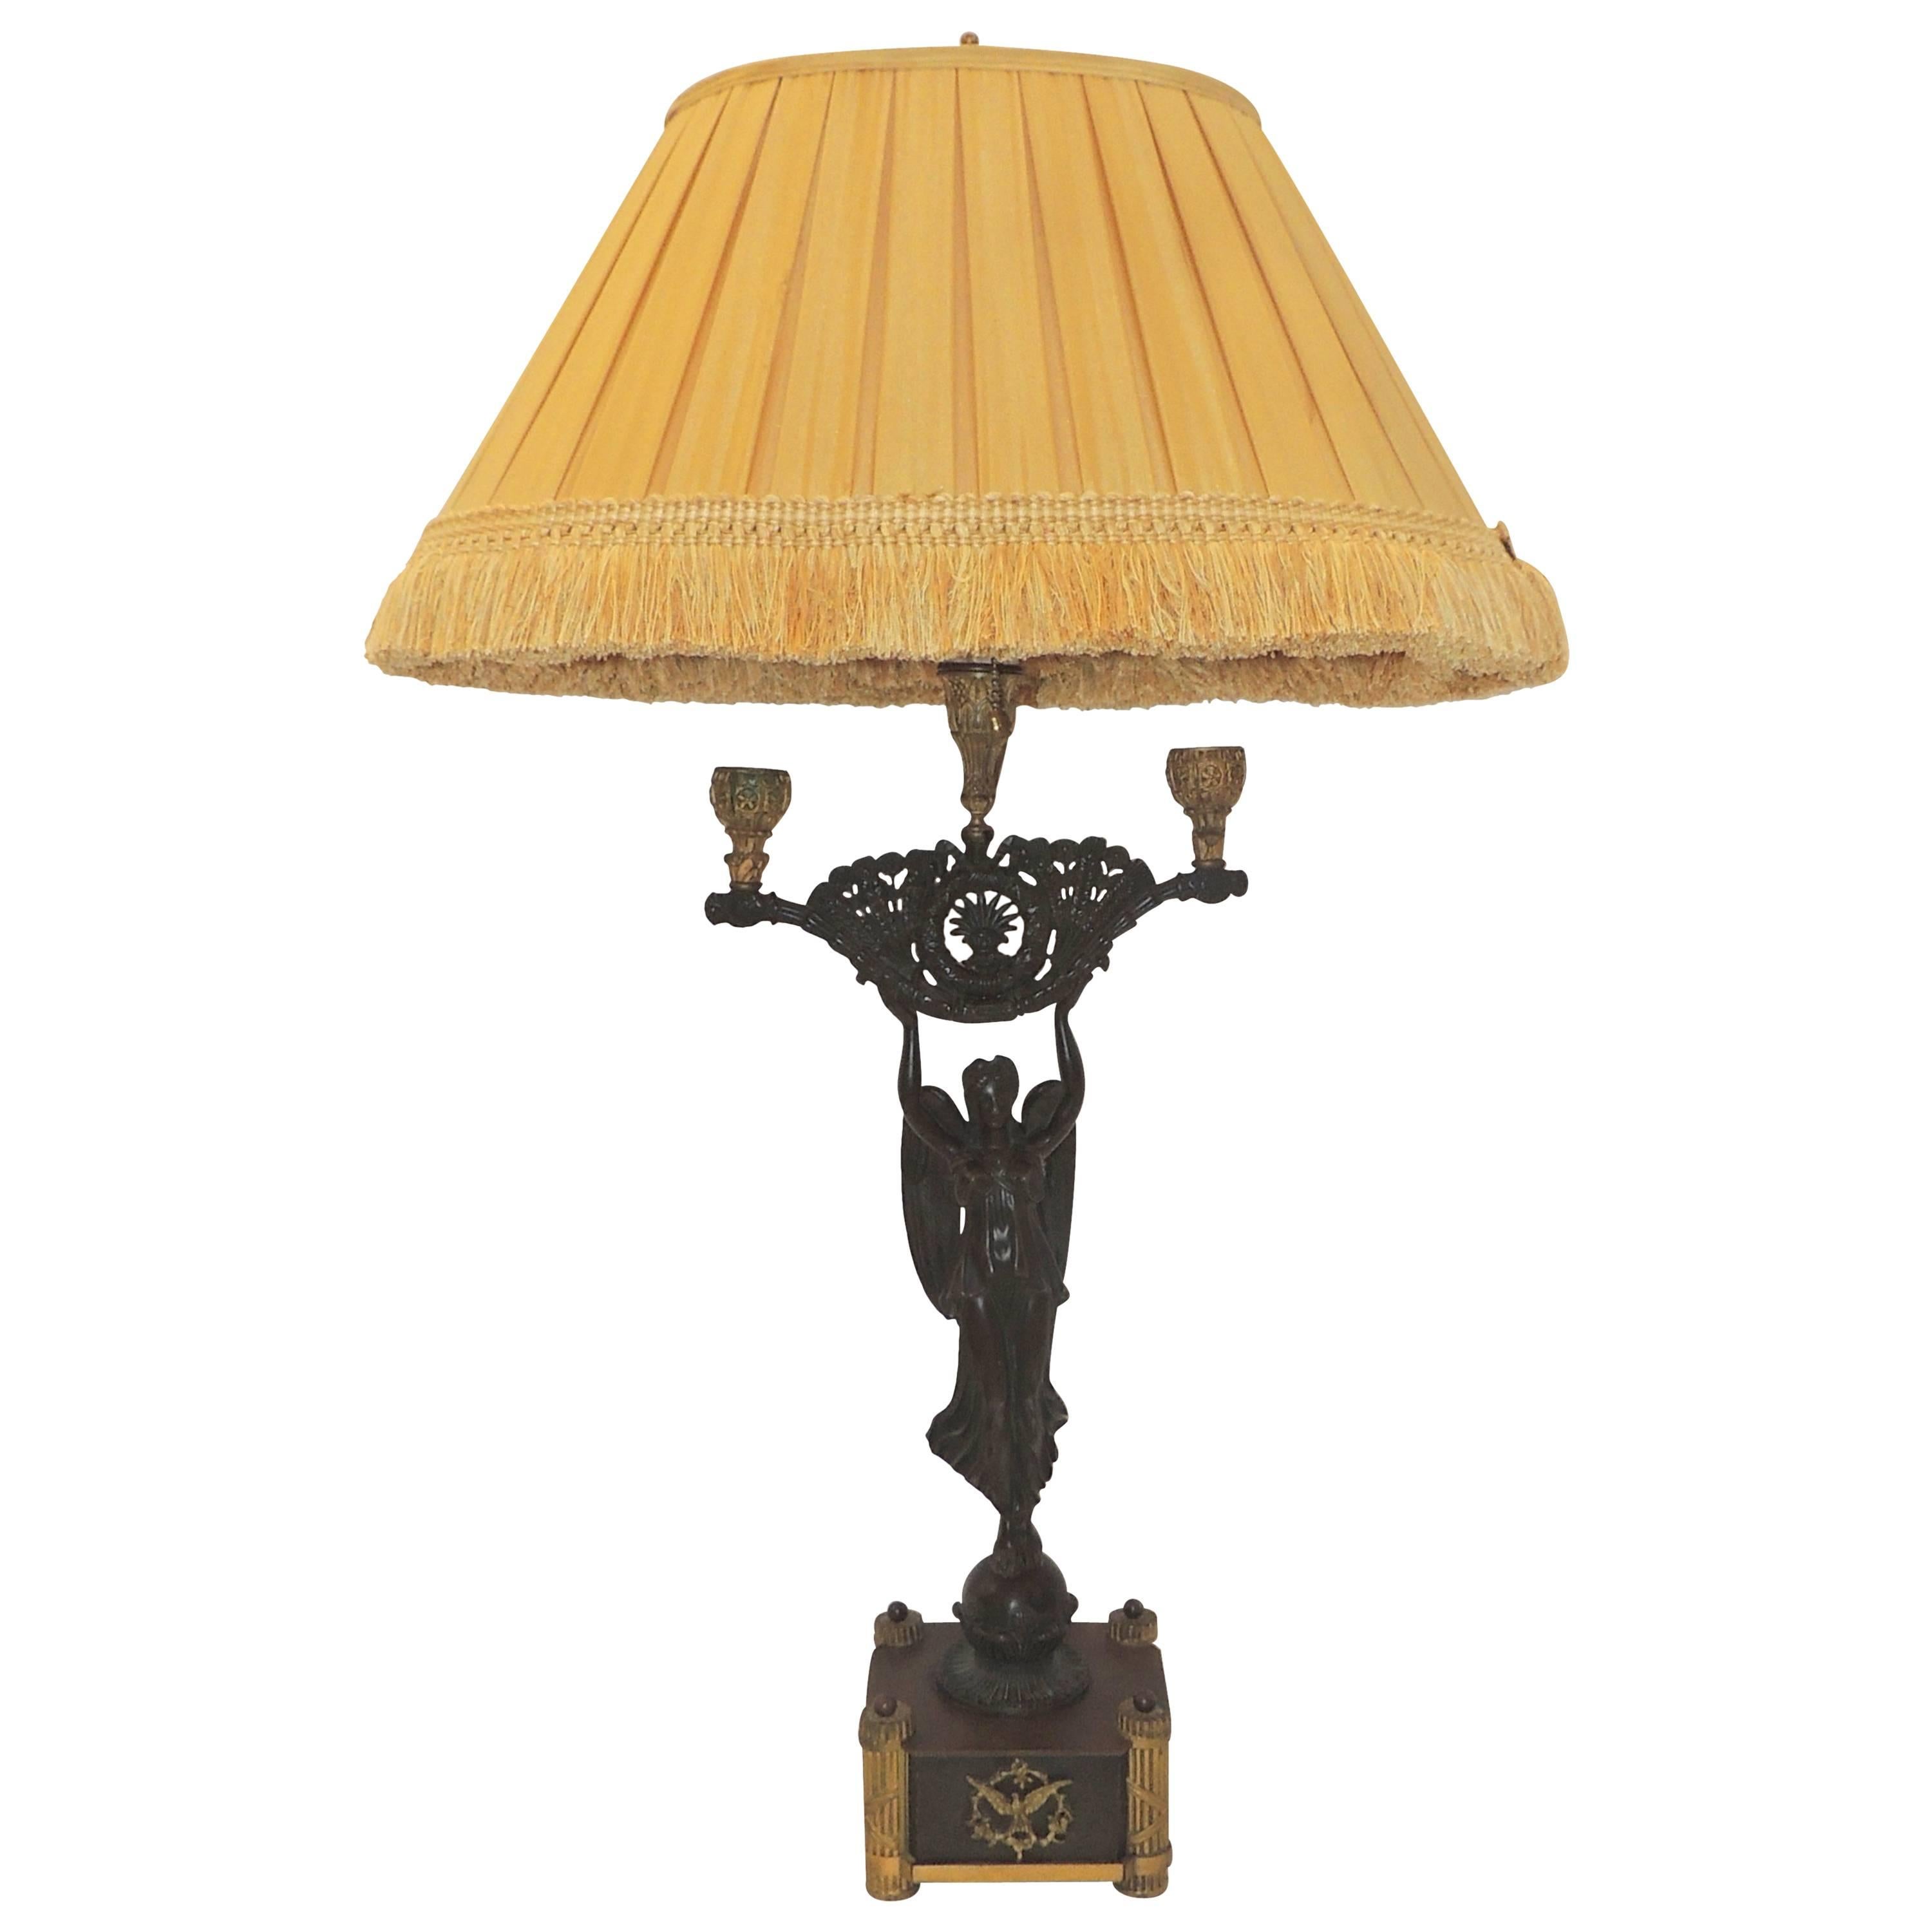 Wonderful French Empire Neoclassical Figural Gilt Patinated Bronze Regency Lamp